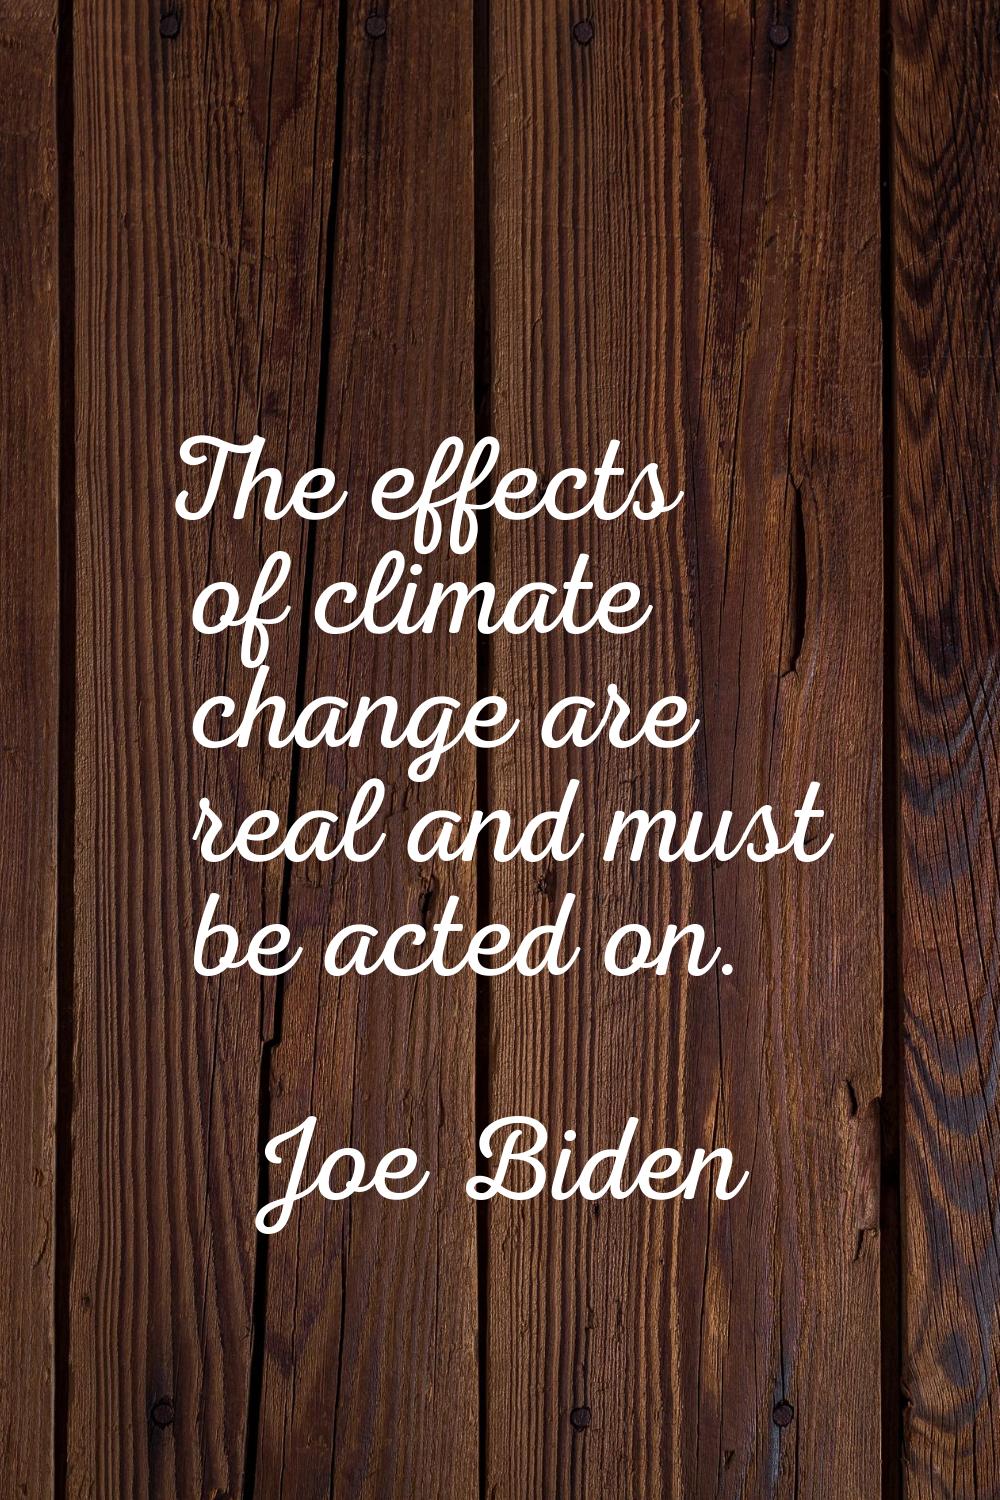 The effects of climate change are real and must be acted on.